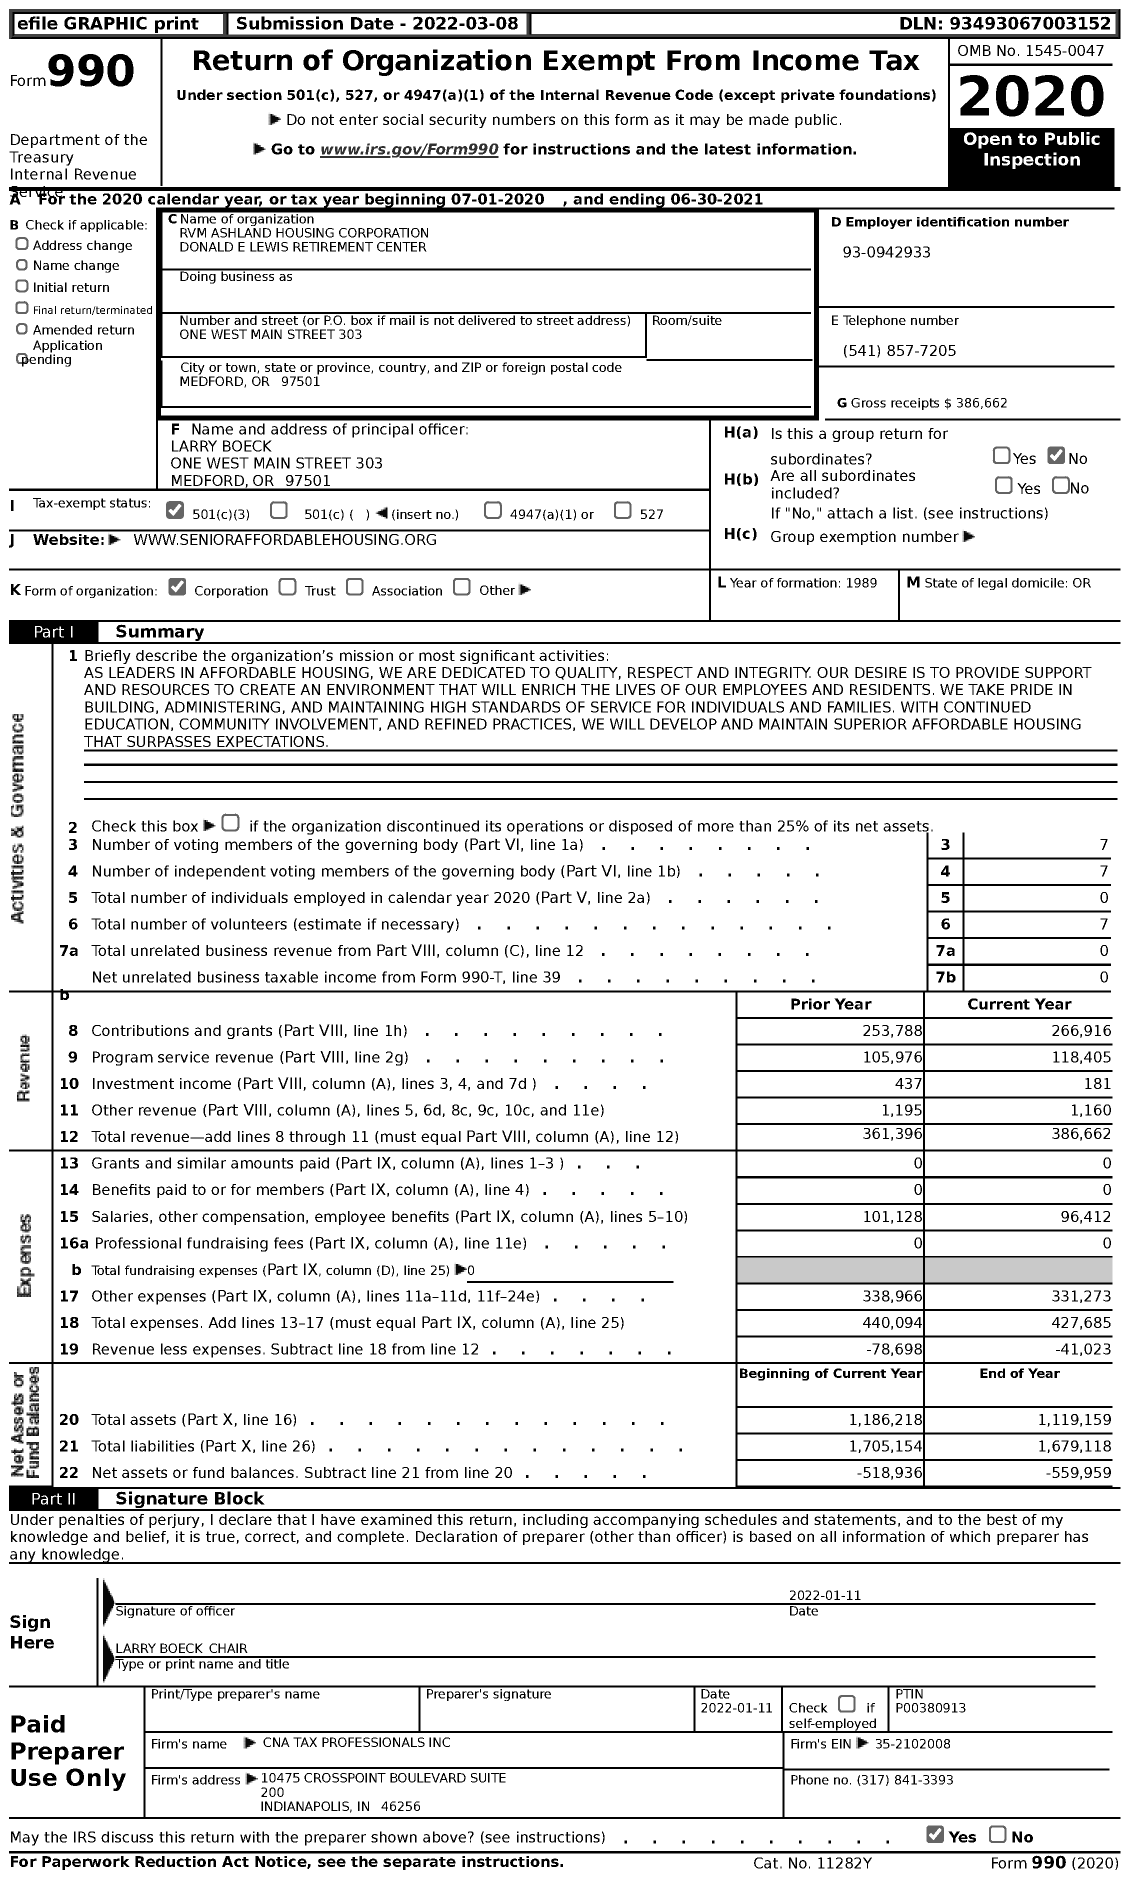 Image of first page of 2020 Form 990 for RVM Ashland Housing Corporation Donald E Lewis Retirement Center